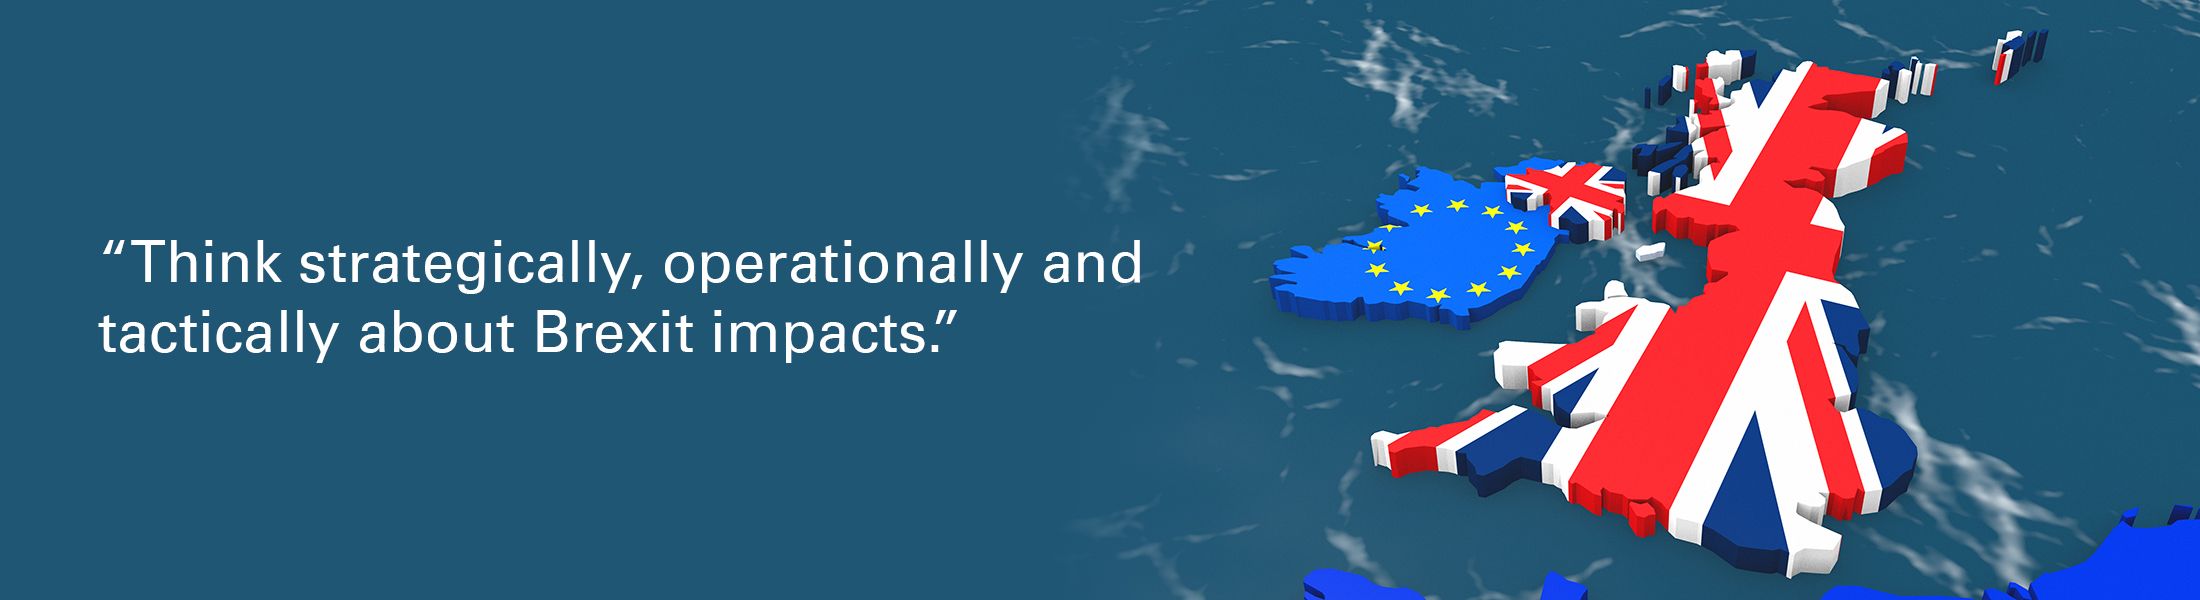 Map of Ireland and Great Britain overlaid with quote "Think strategically, operationally and tactically about Brexit impacts"